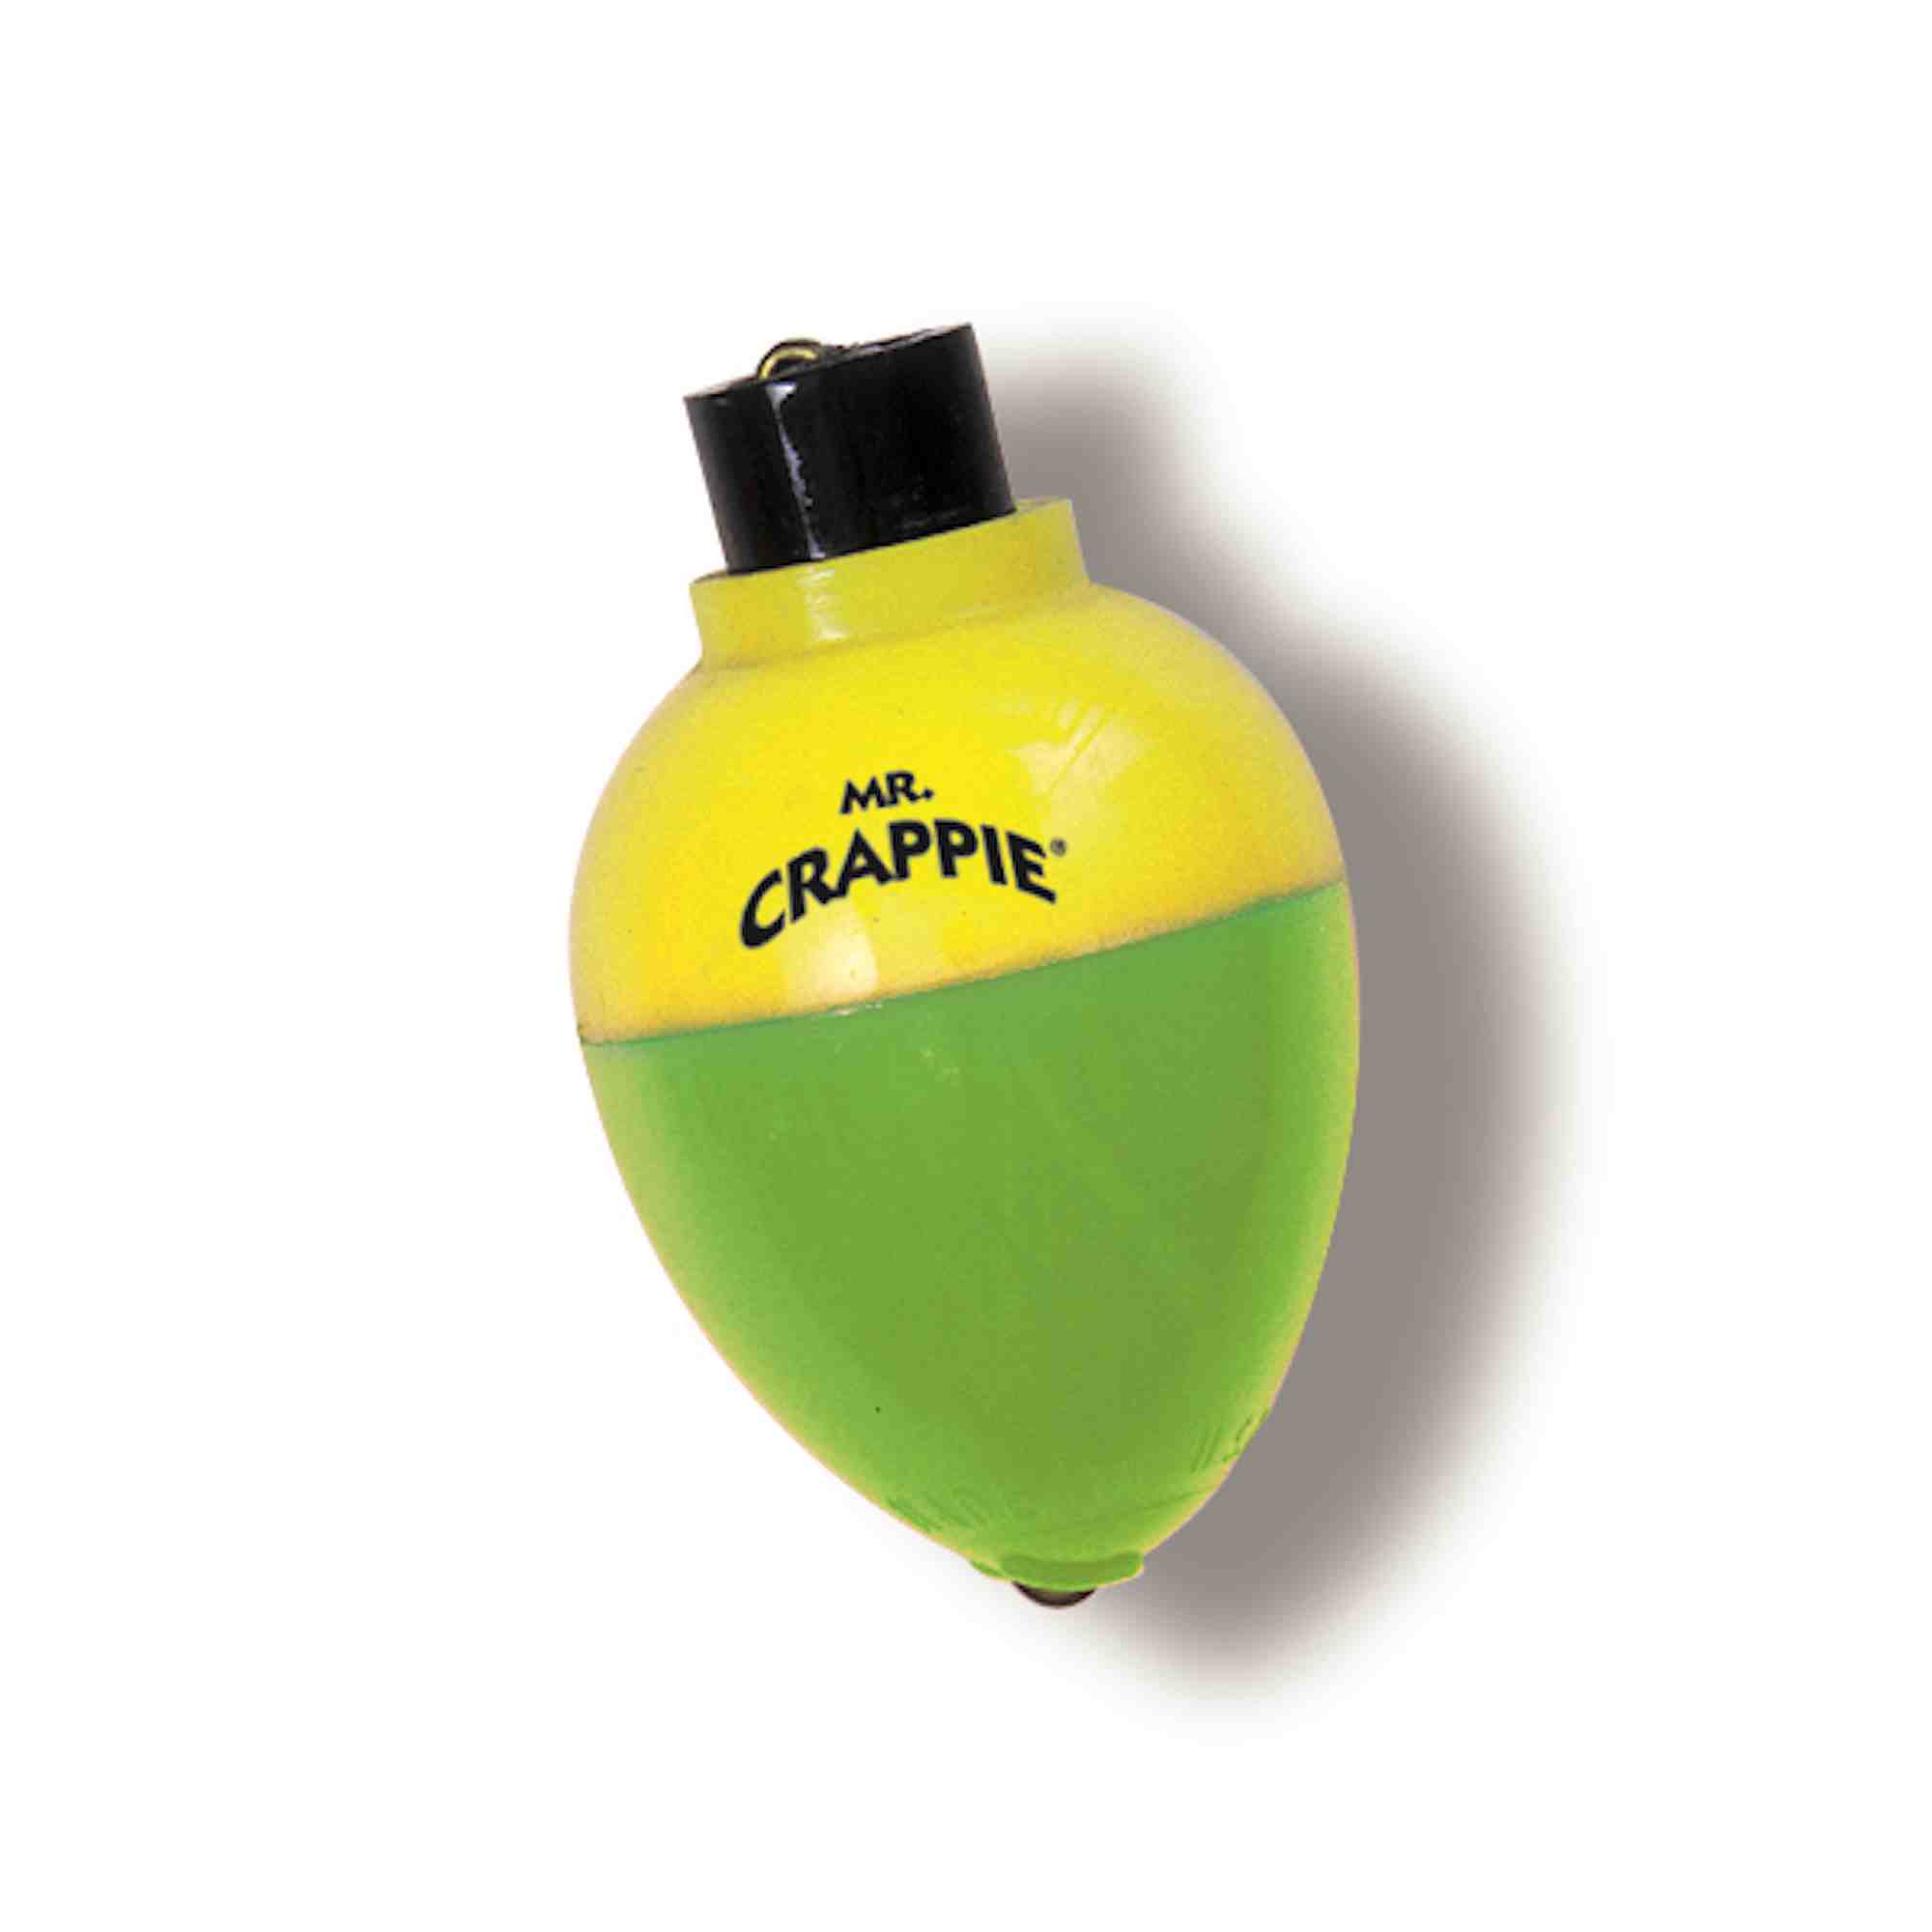 MR.CRAPPIE BY BETTS FGS437-4G Light Stick, Green, For: Mr. Crappie